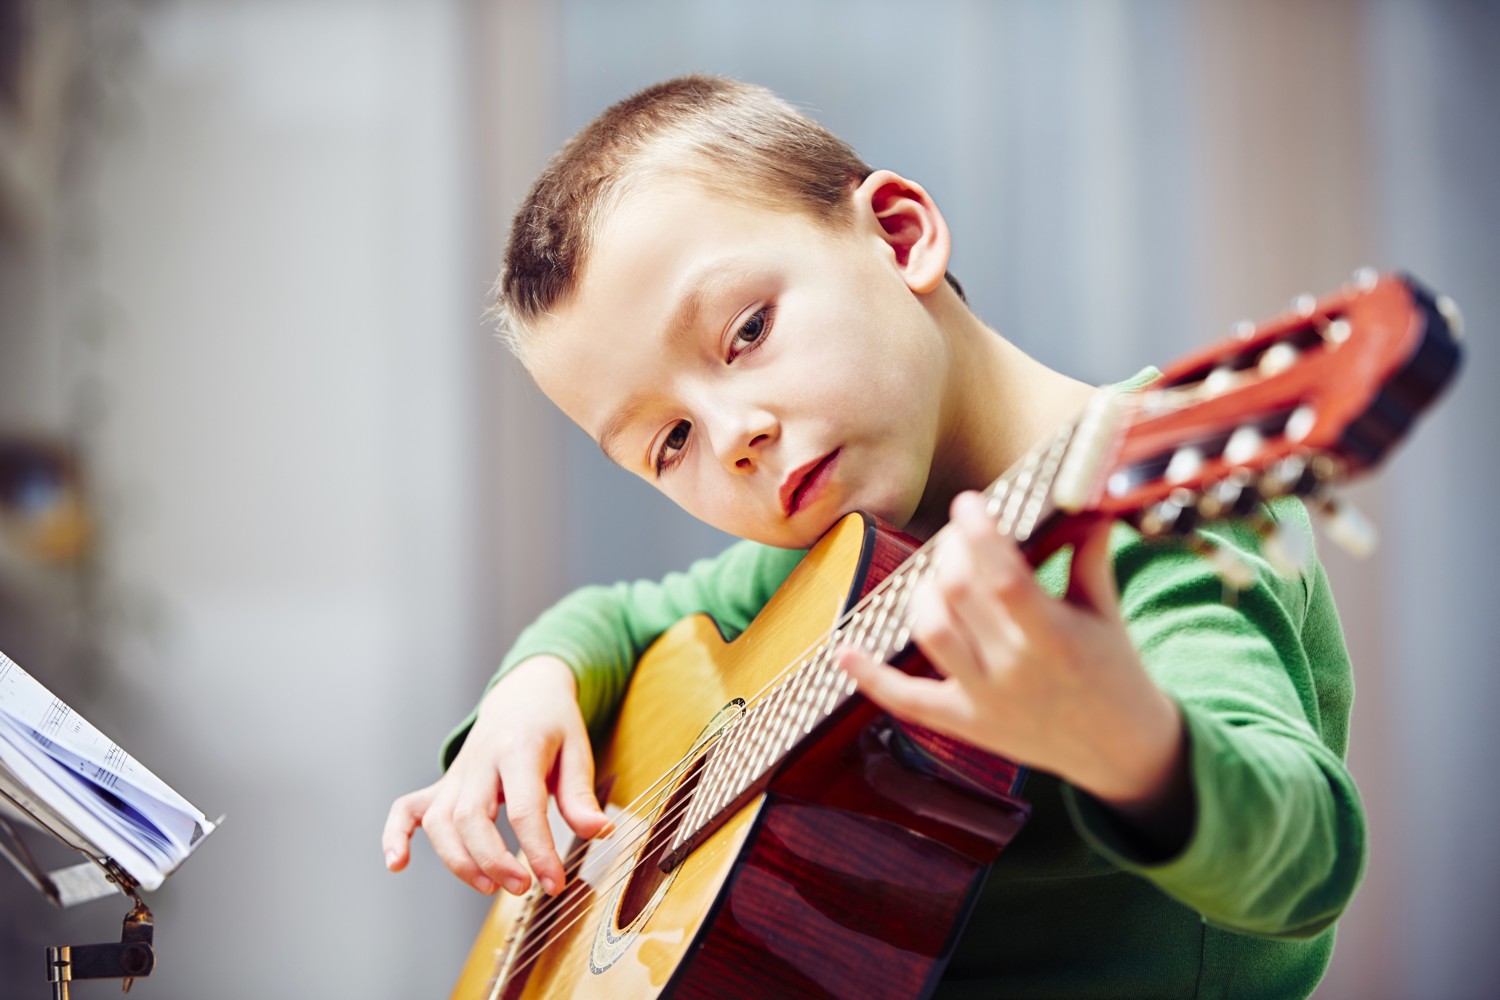 Beginners Start to Learn How to Play the Guitar at an Early Age